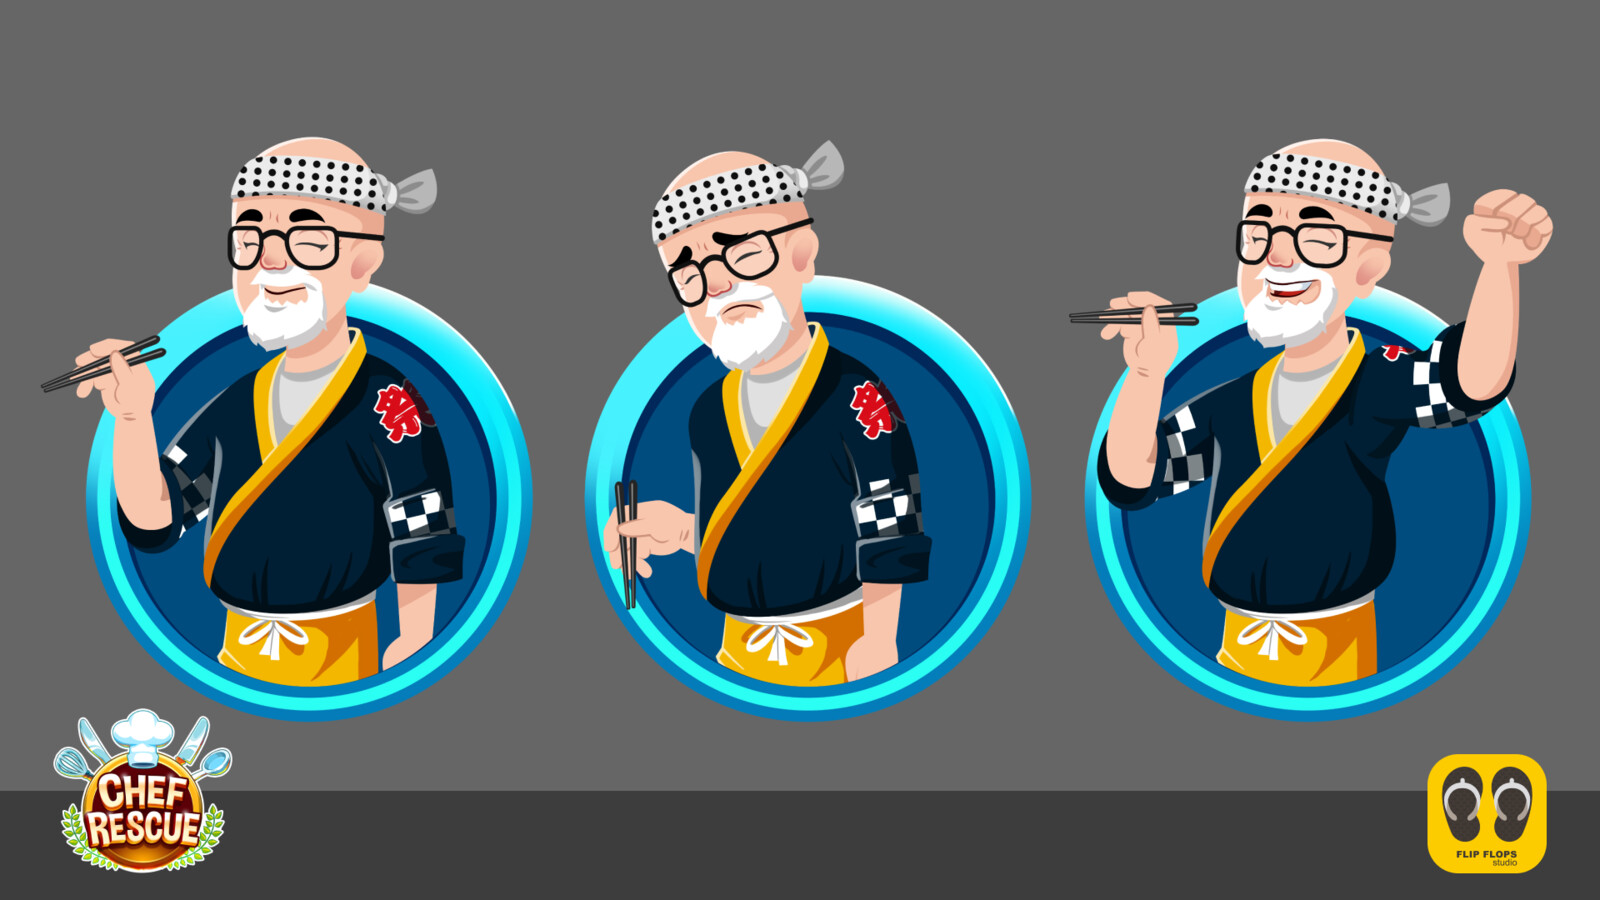 Final artwork of the chef in 3 positions for animation.